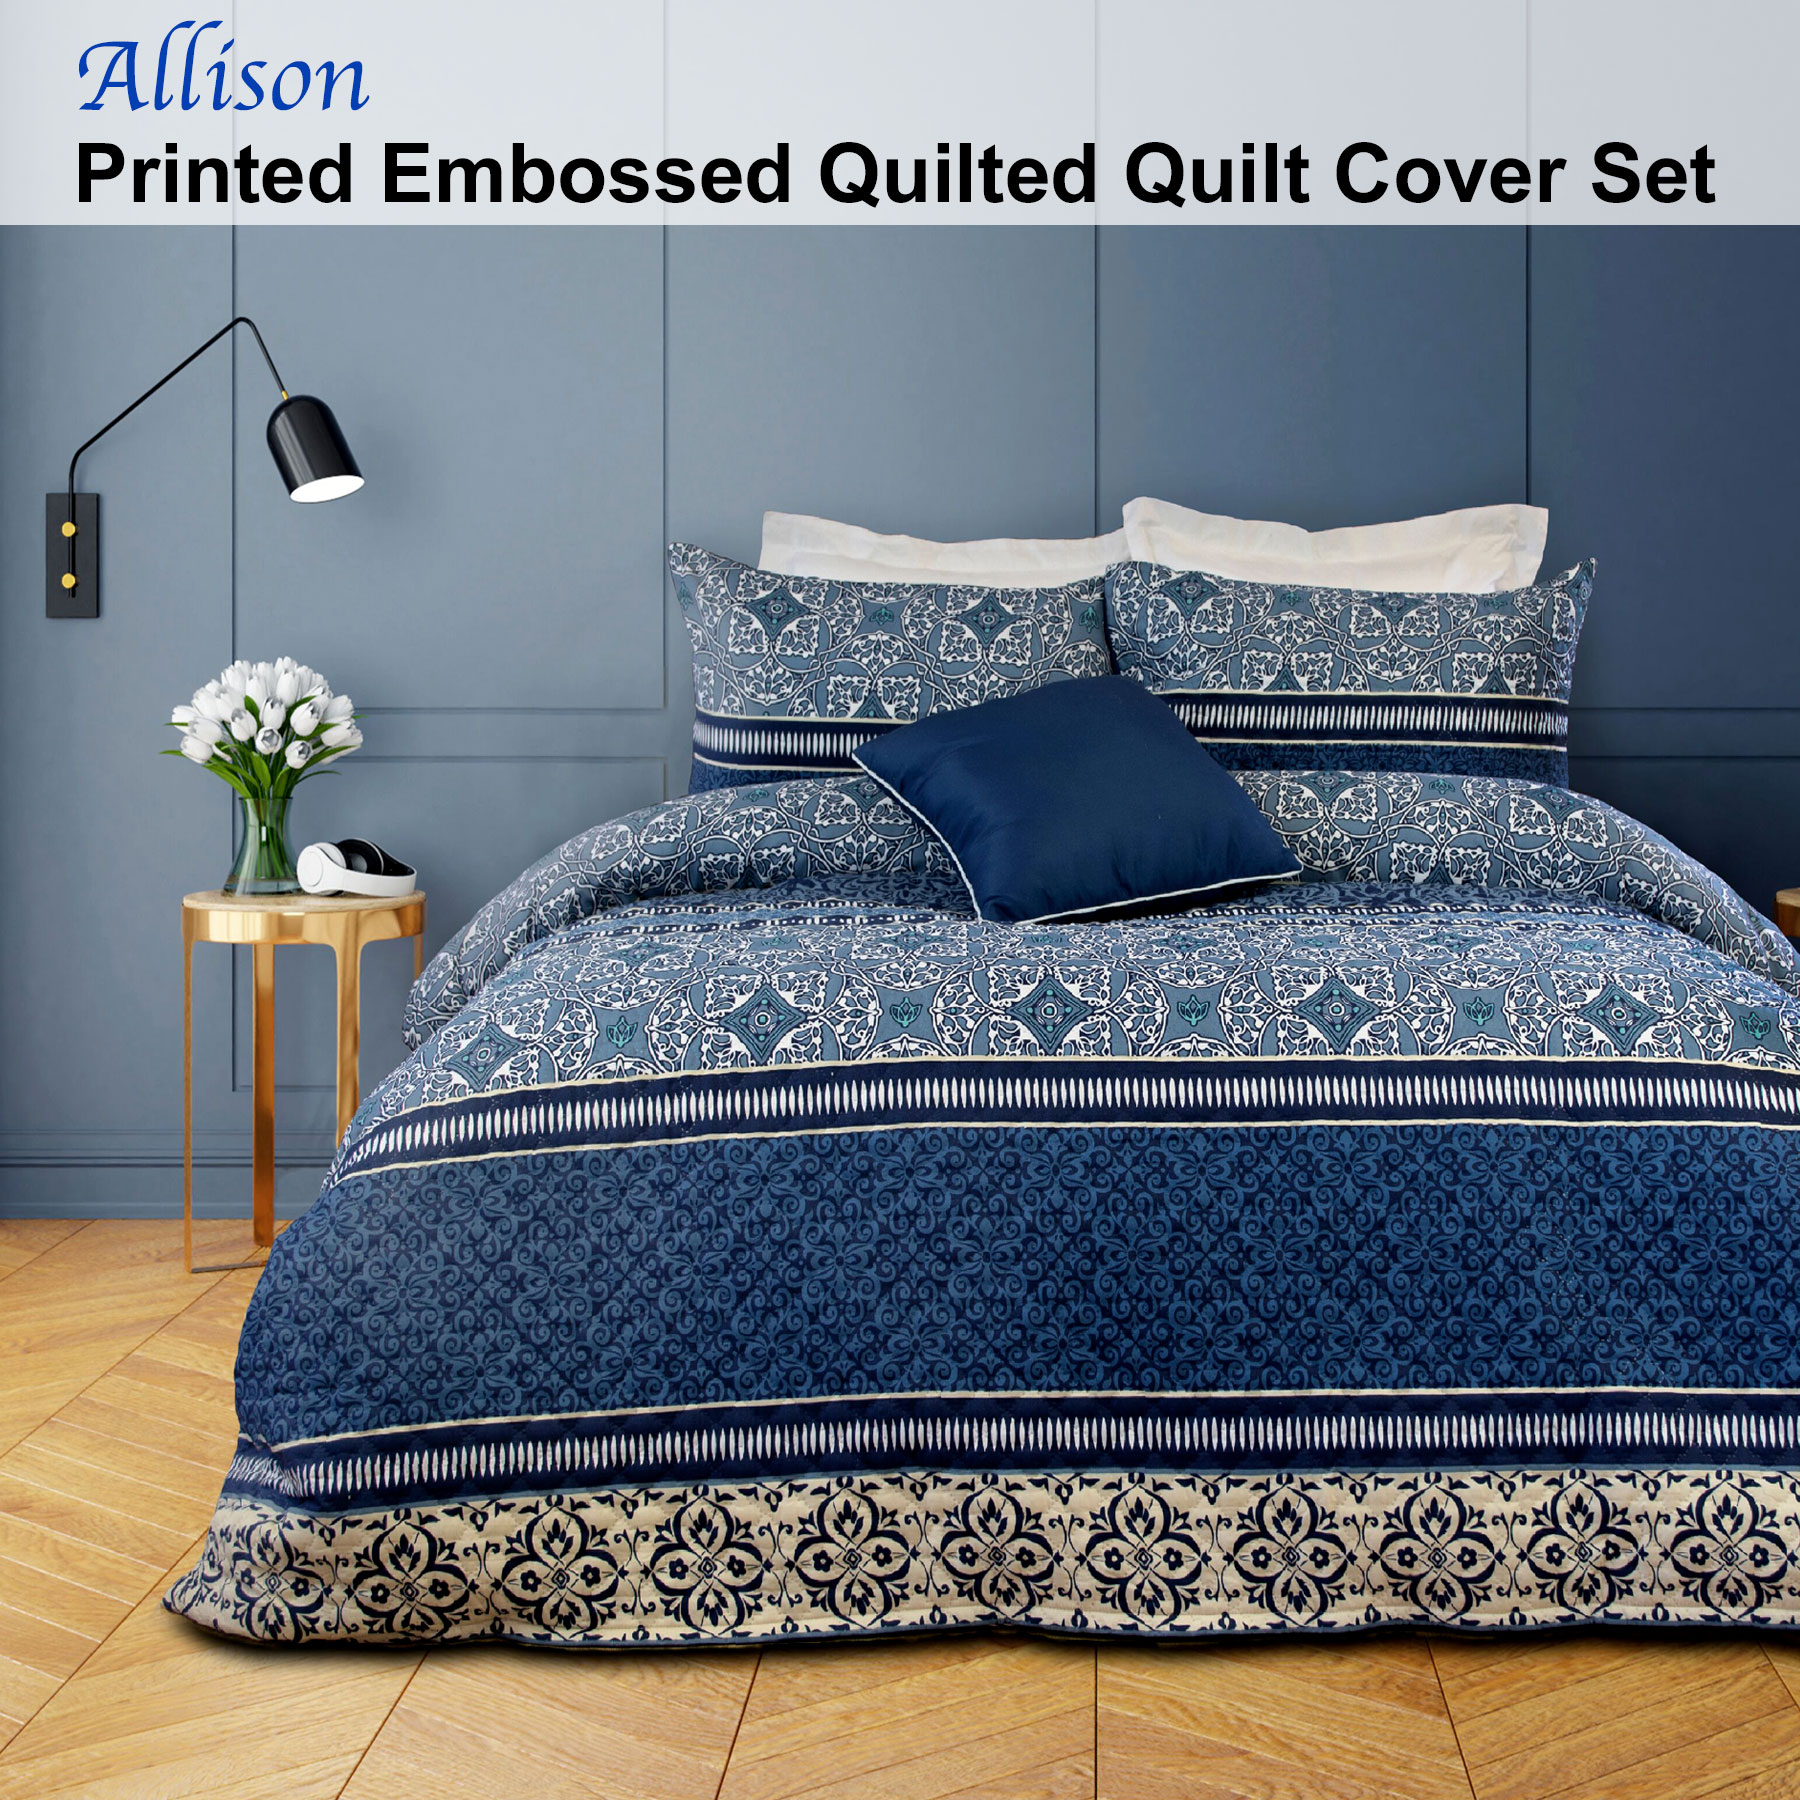 Allison Printed Embossed Quilt Cover Set By Ardor Single